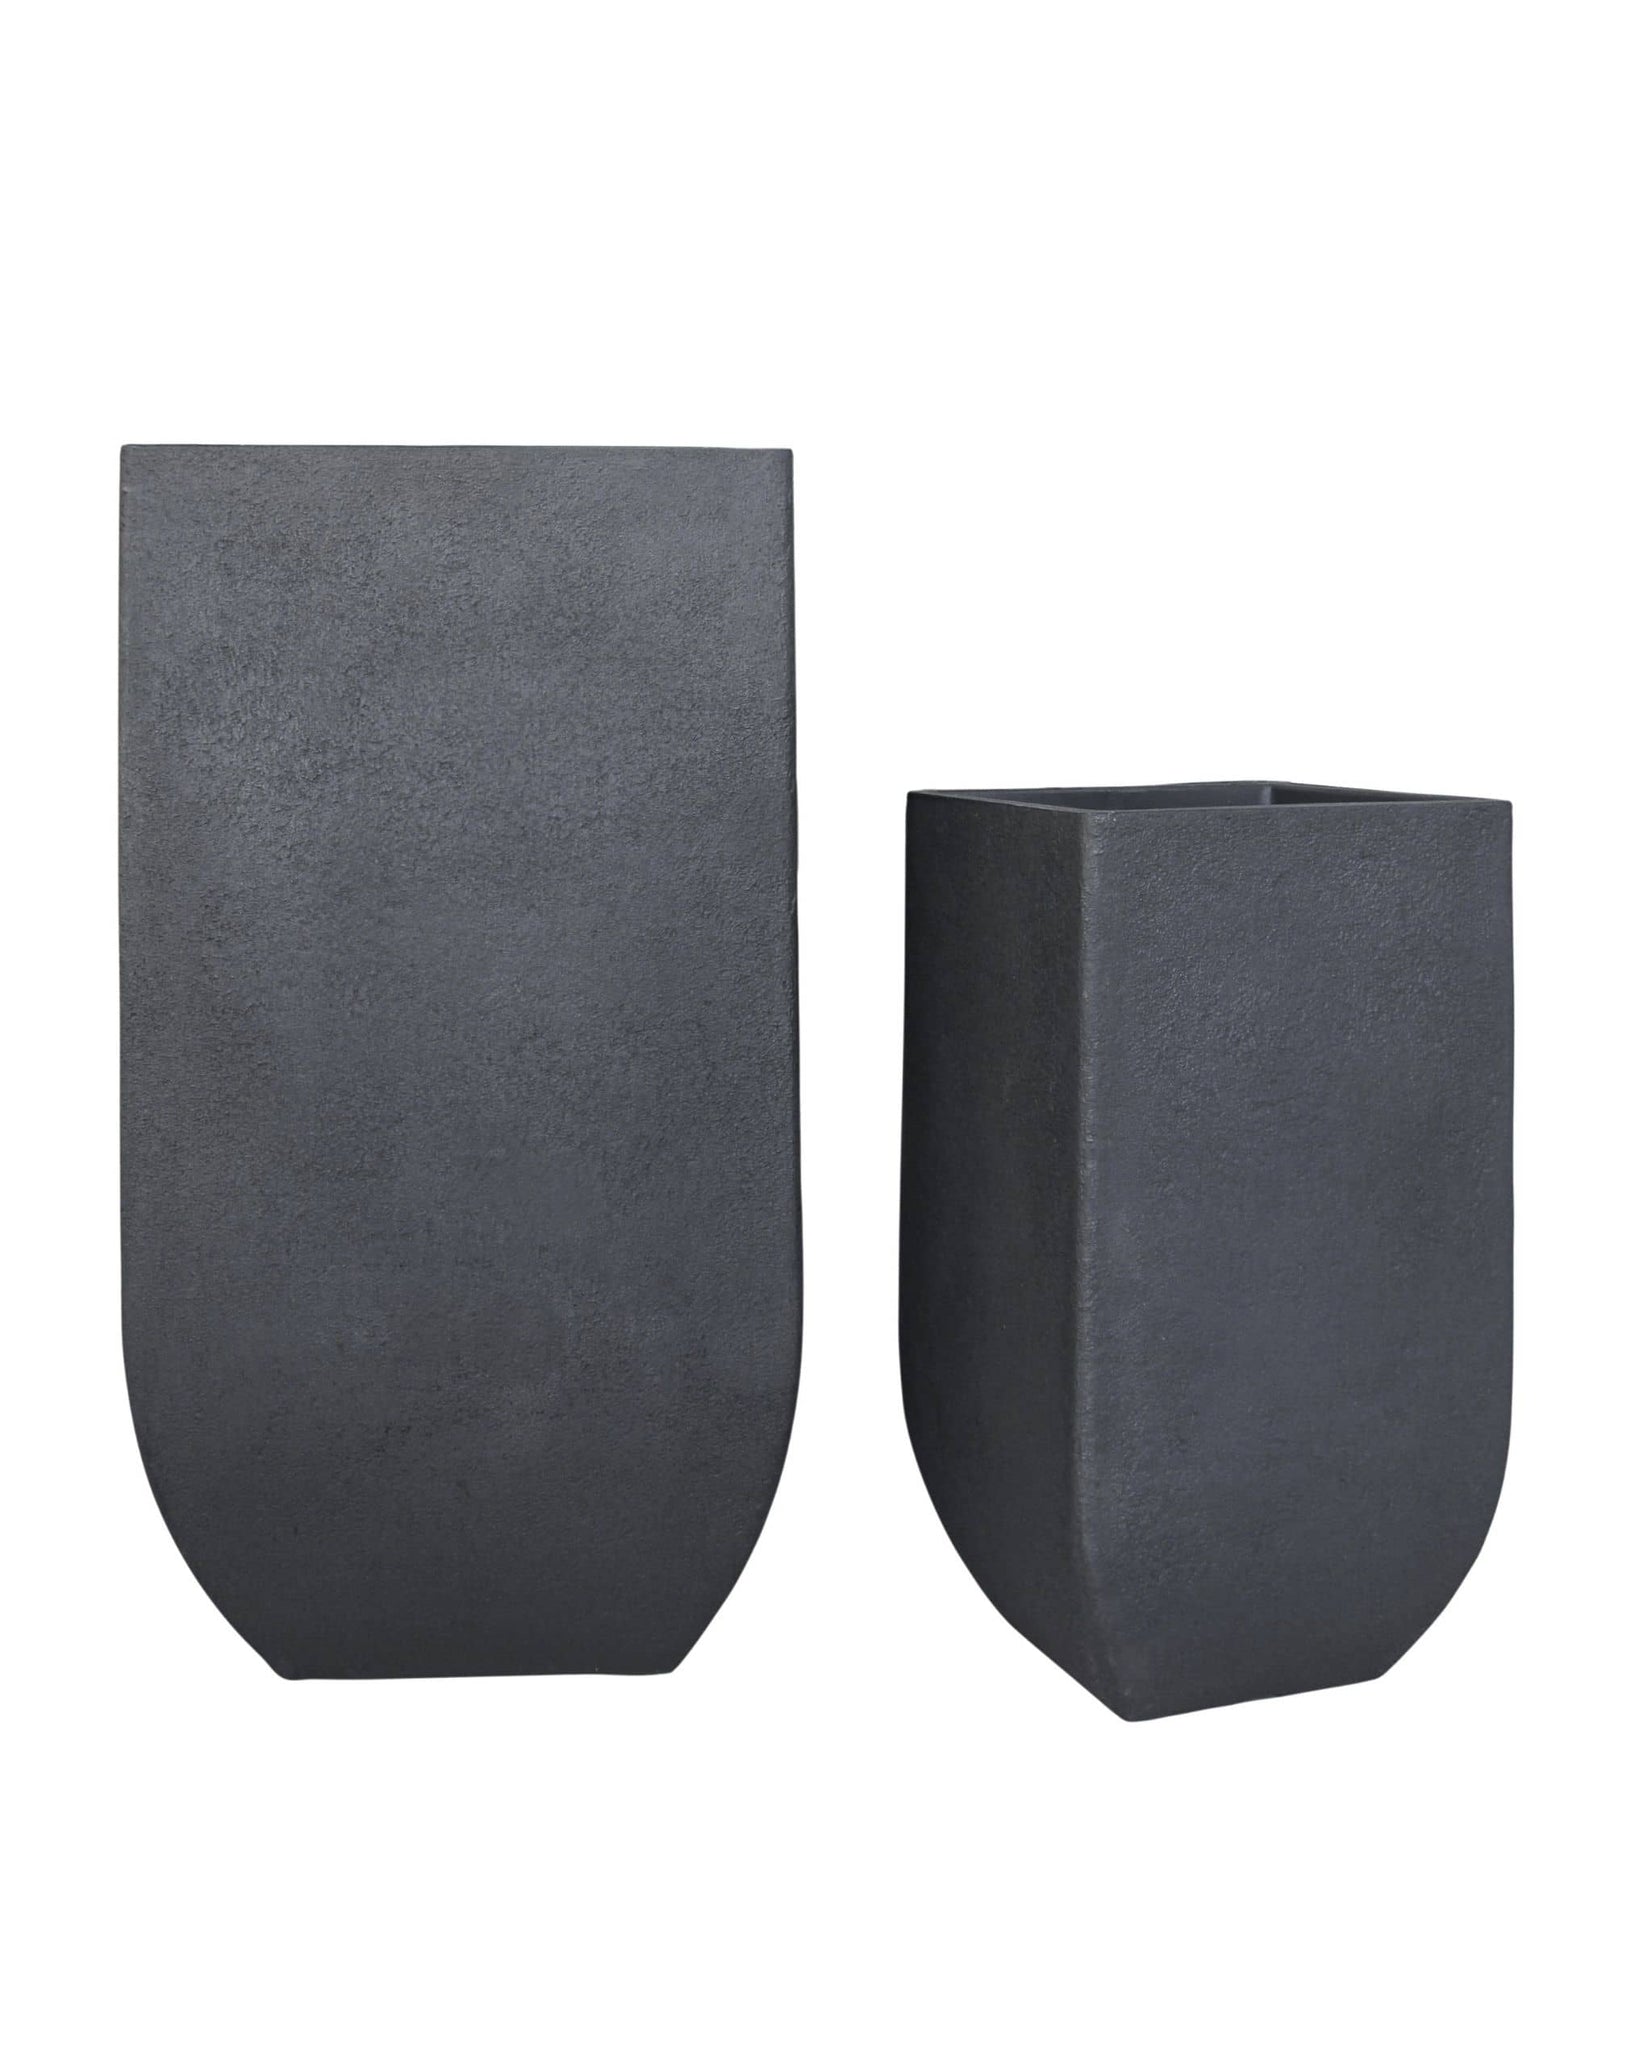 slight angled view of the small and large Japi verticale square planters side by side, tall, upright, colour Lead (black)